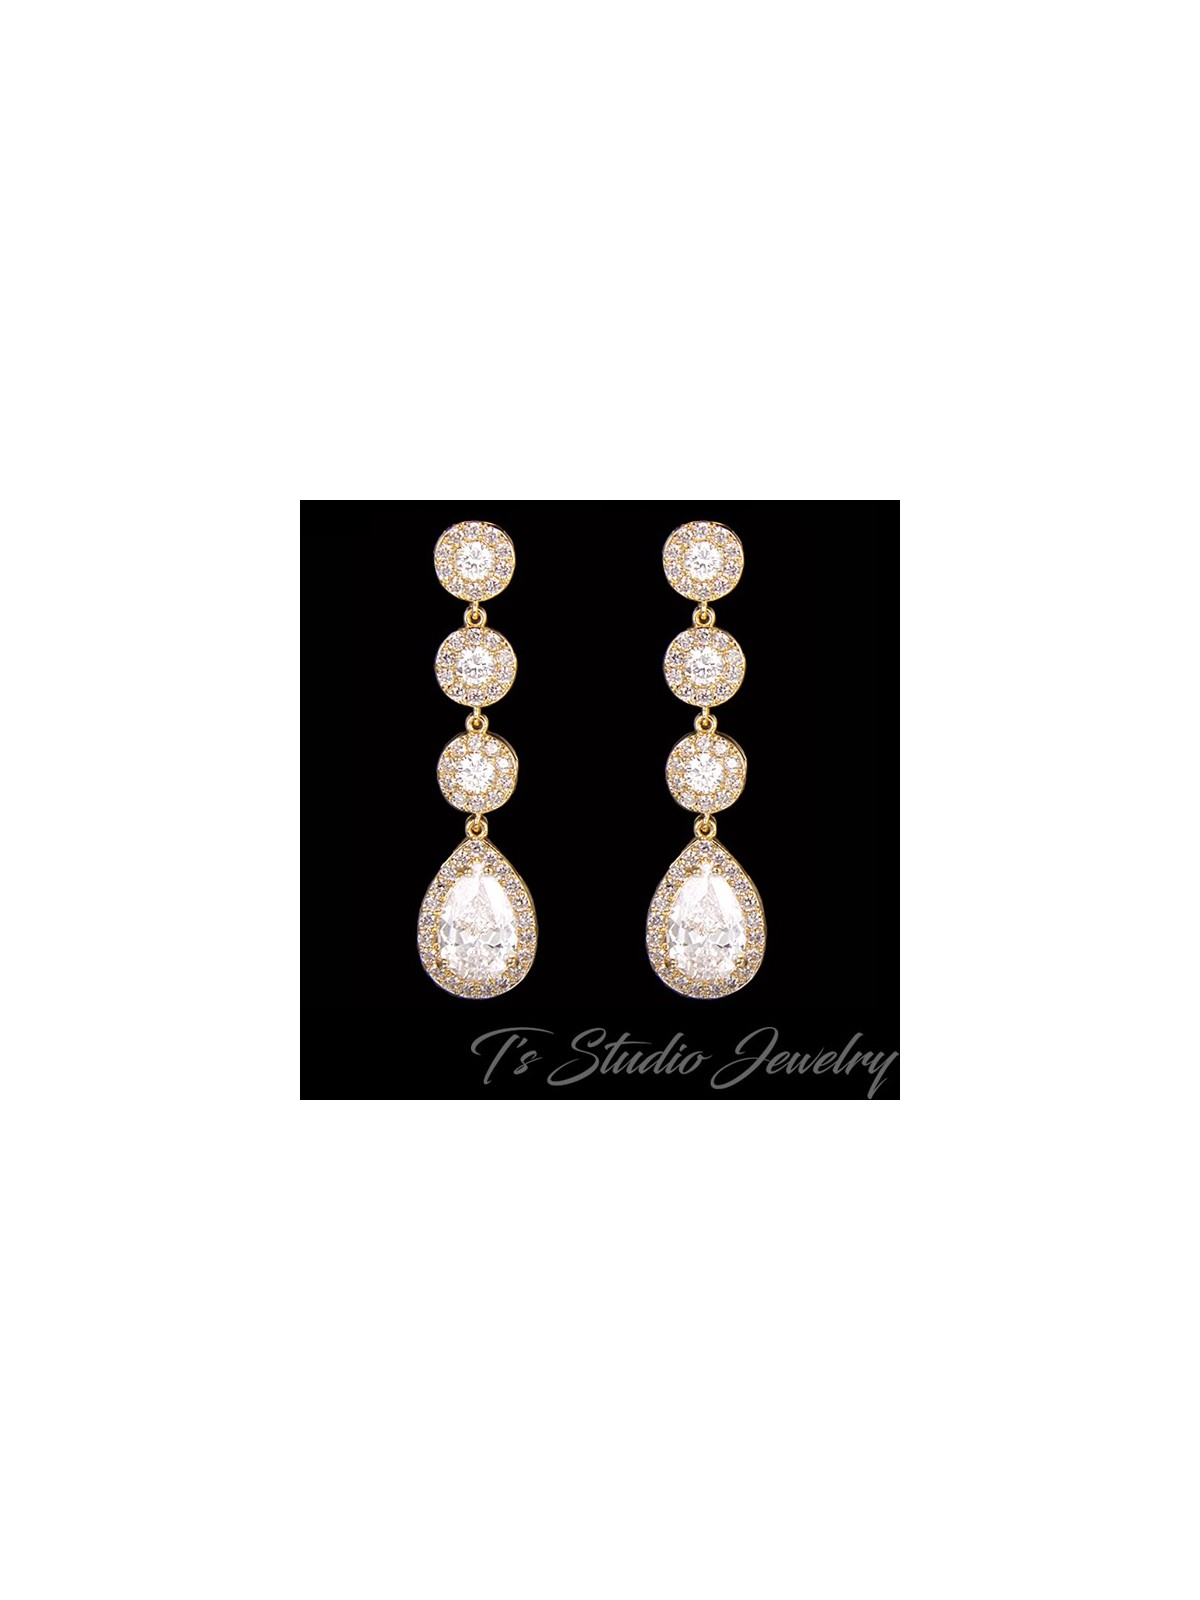 CZ Bridal Earrings Silver, Gold or Rose Gold